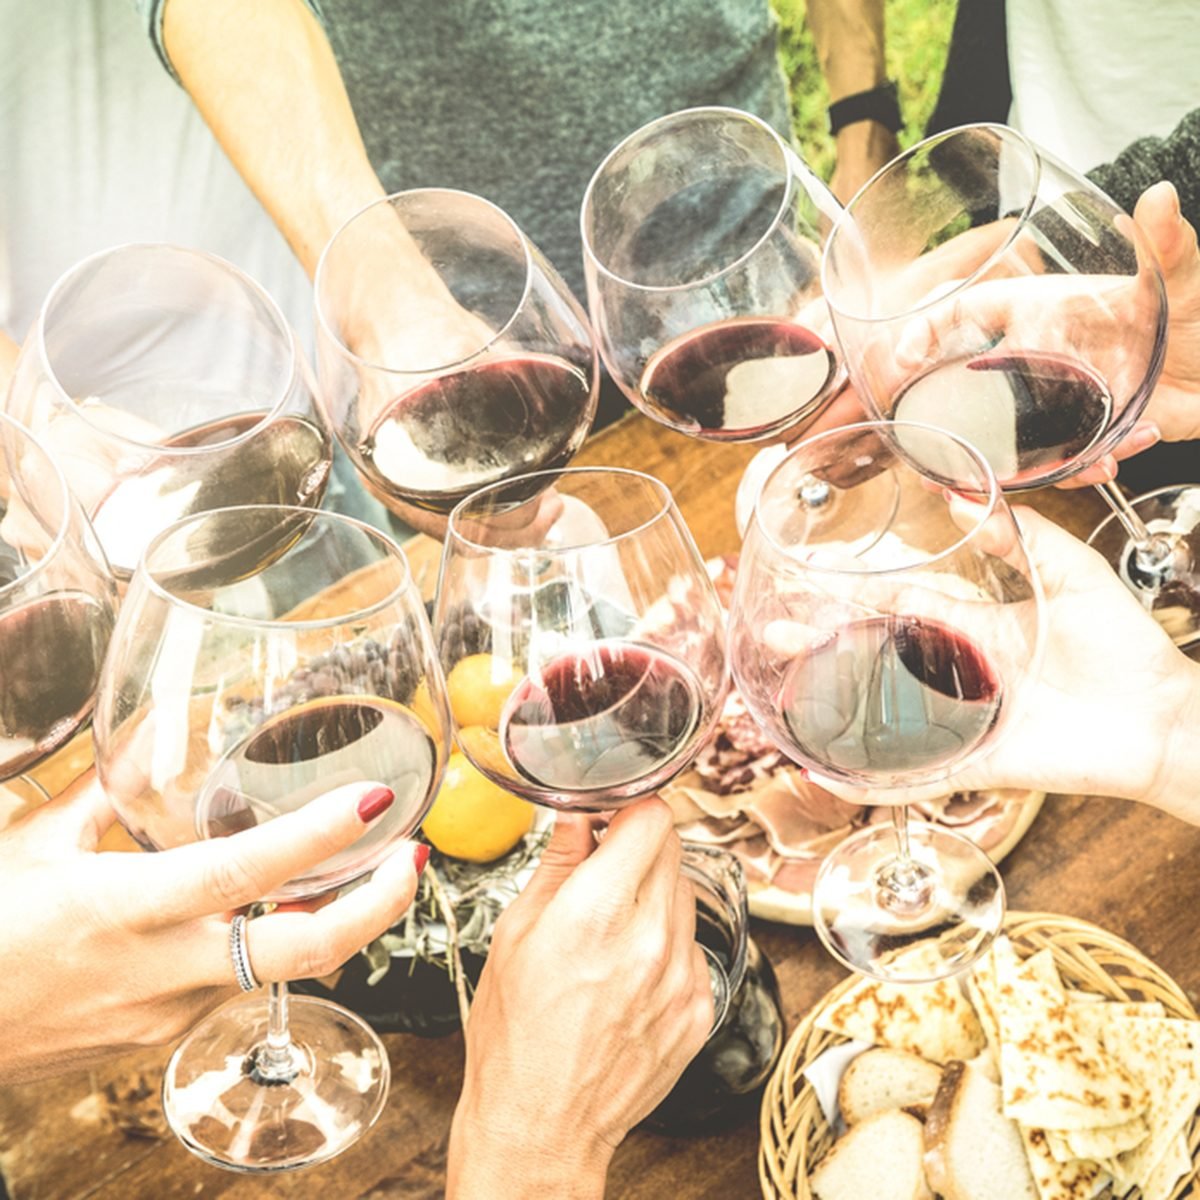 Friends hands toasting red wine glass and having fun outdoors cheering with winetasting - Young people enjoying harvest time together at farmhouse vineyard countryside - Youth and friendship concept; Shutterstock ID 570070135